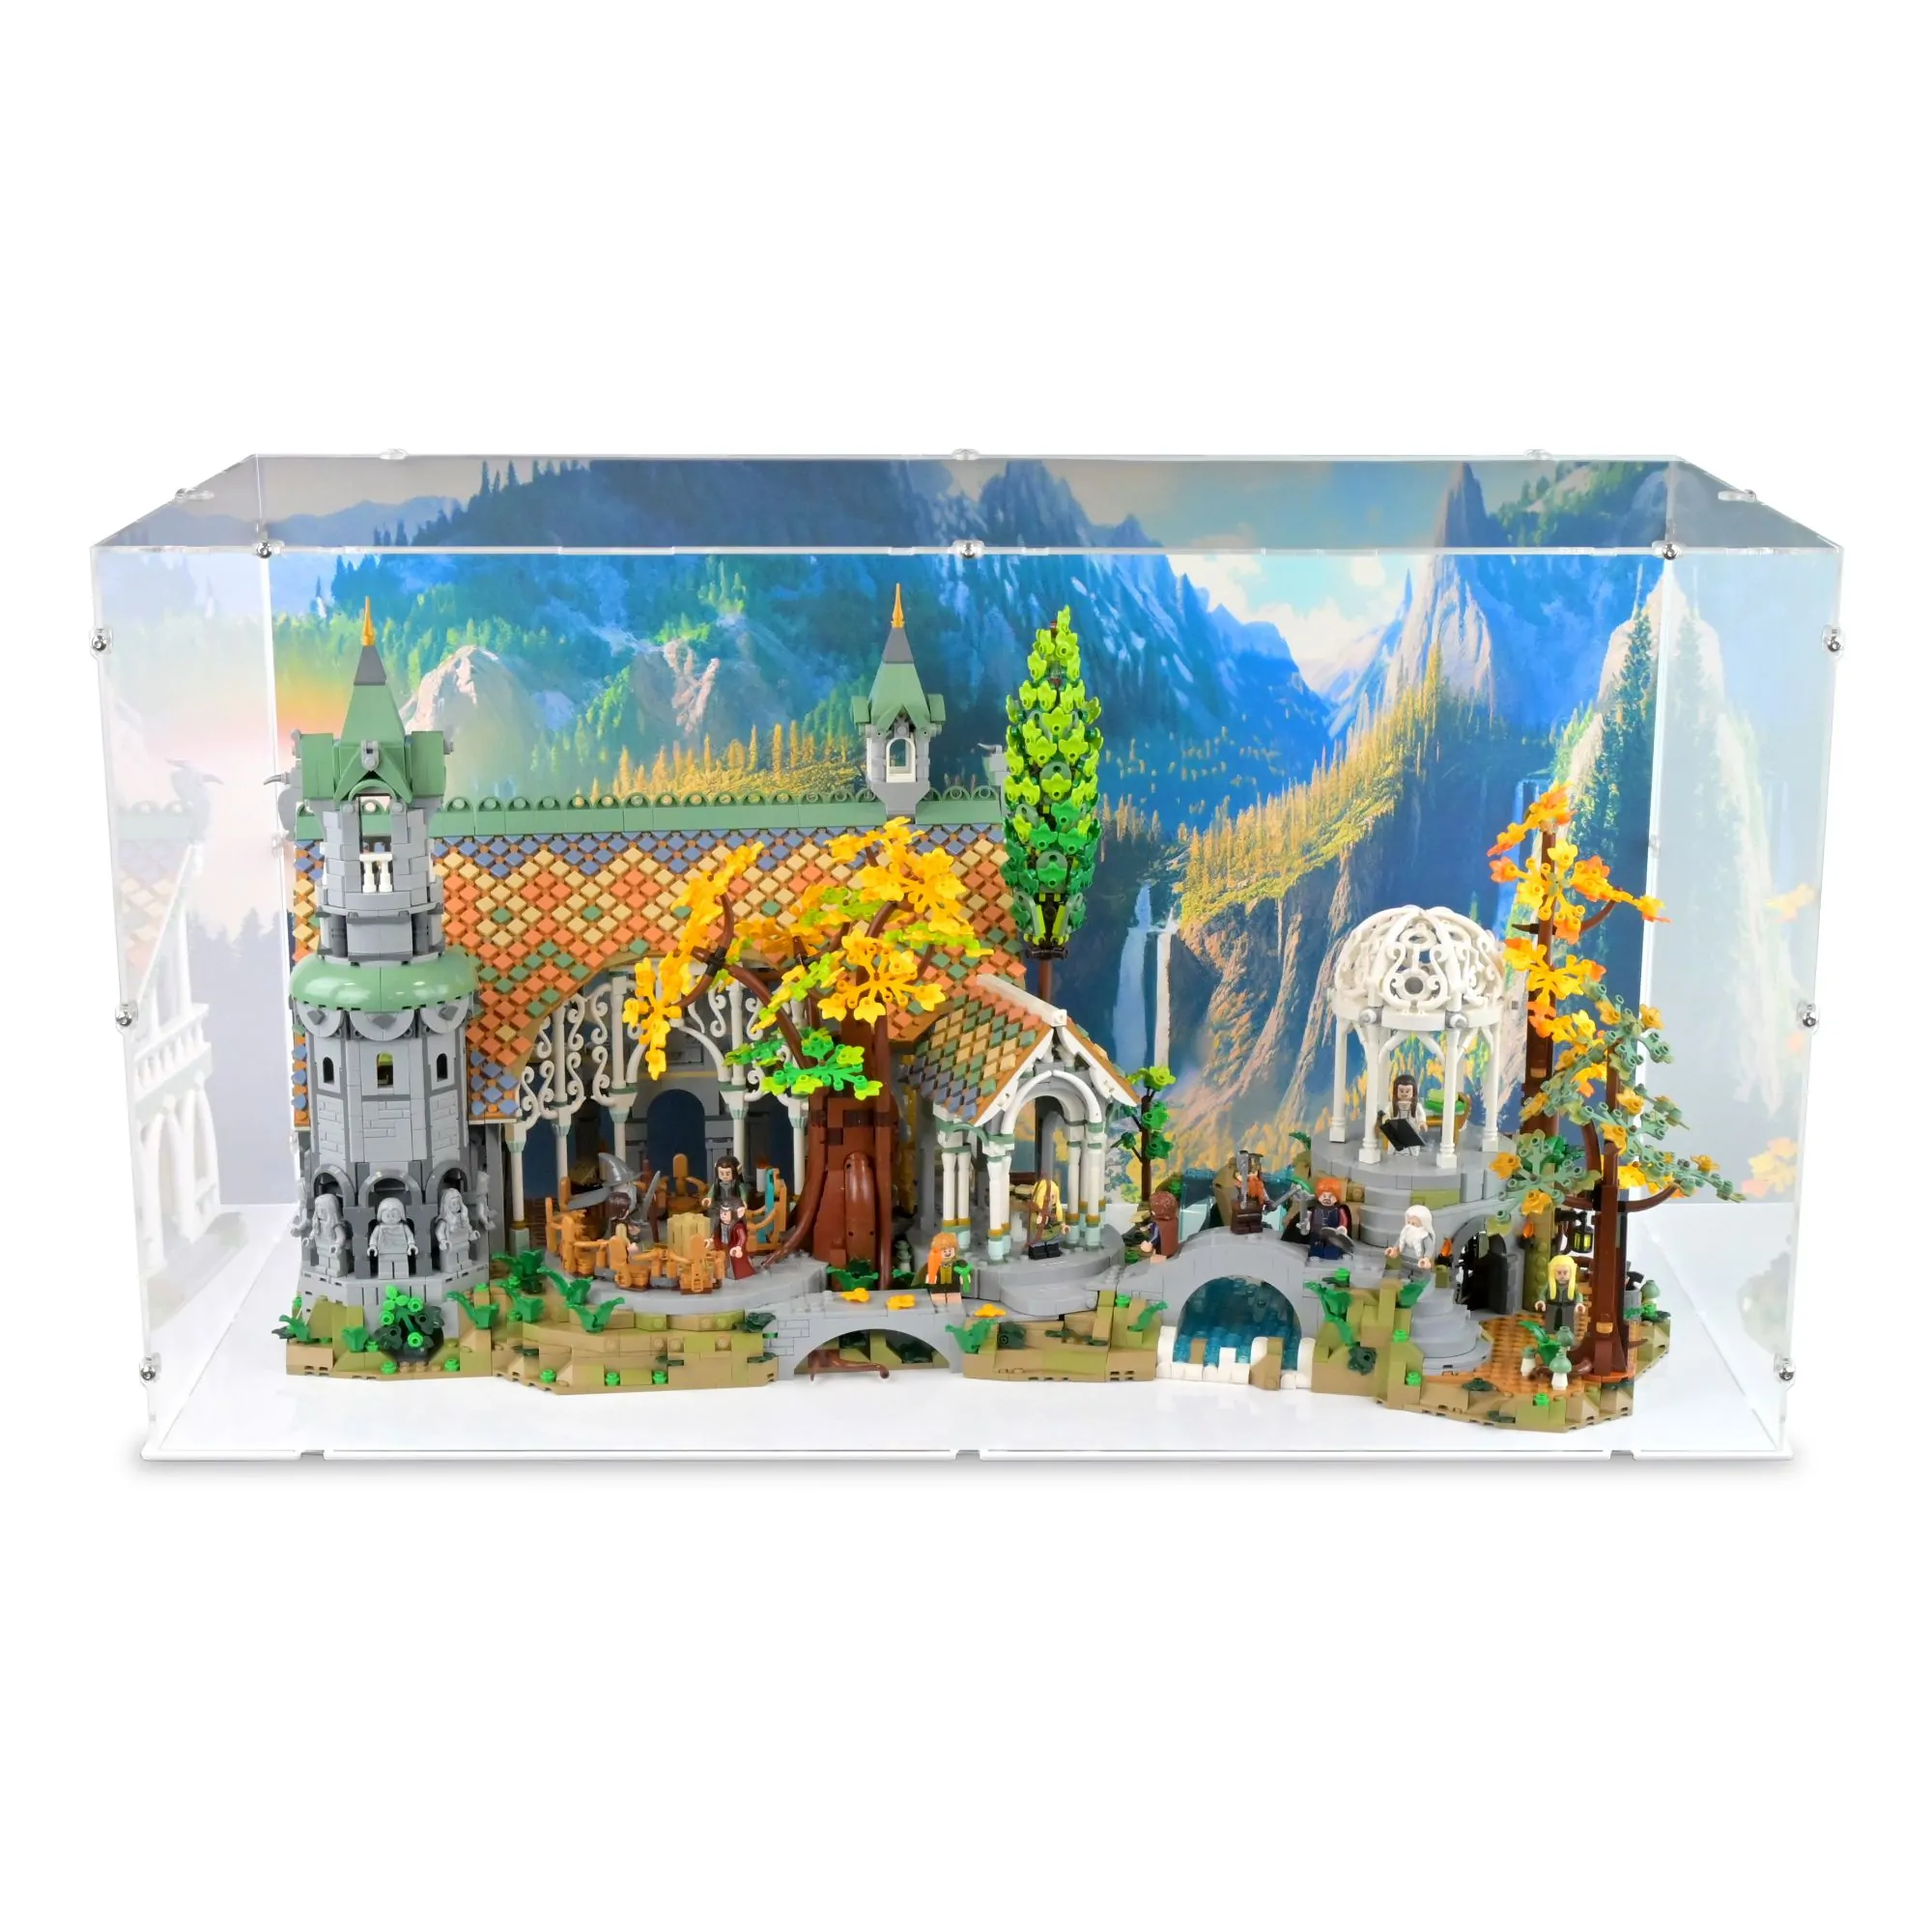 Display Case for 10316 - The Lord of The Rings: Rivendell - Brickcessories